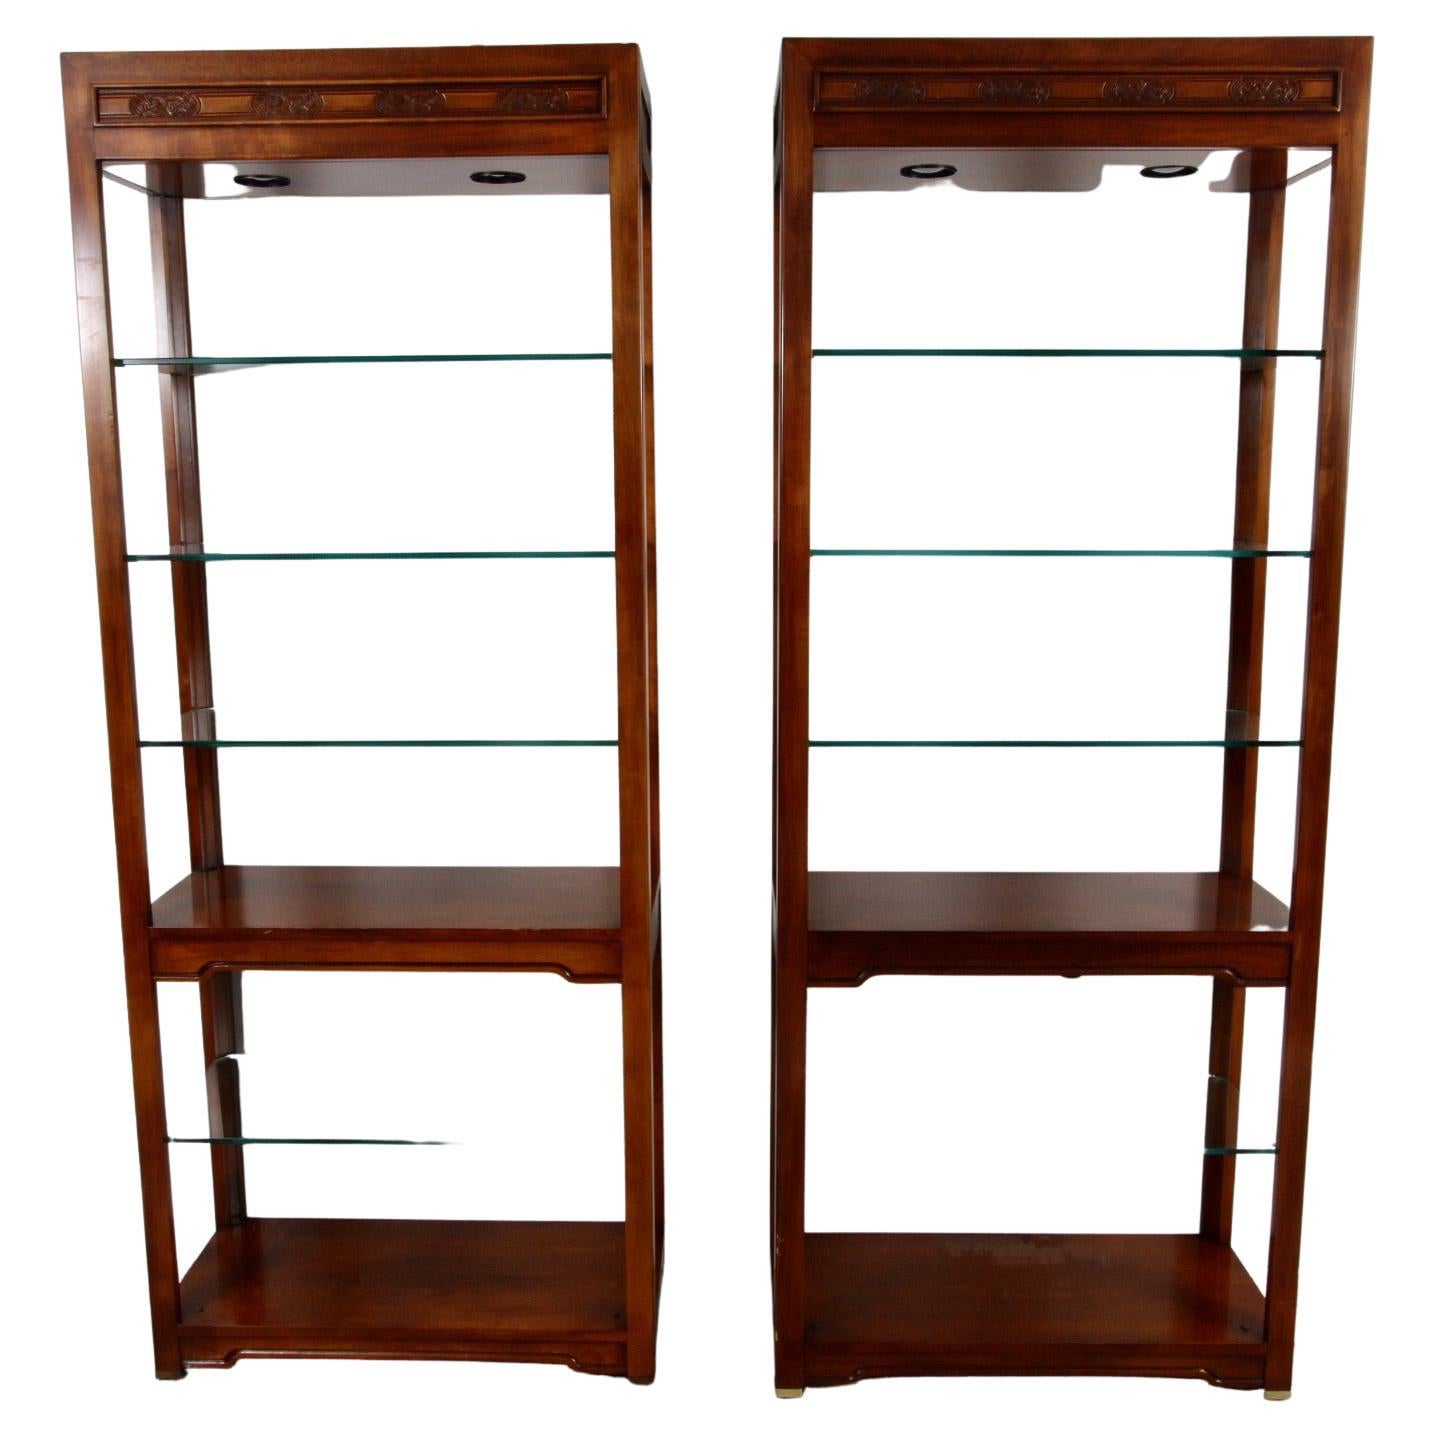 Clean, well-made set of Hilbriten/Bernhardt mahogany asian-influence etageres. Both pieces have a dimmer switch below middle wood shelf (see video).